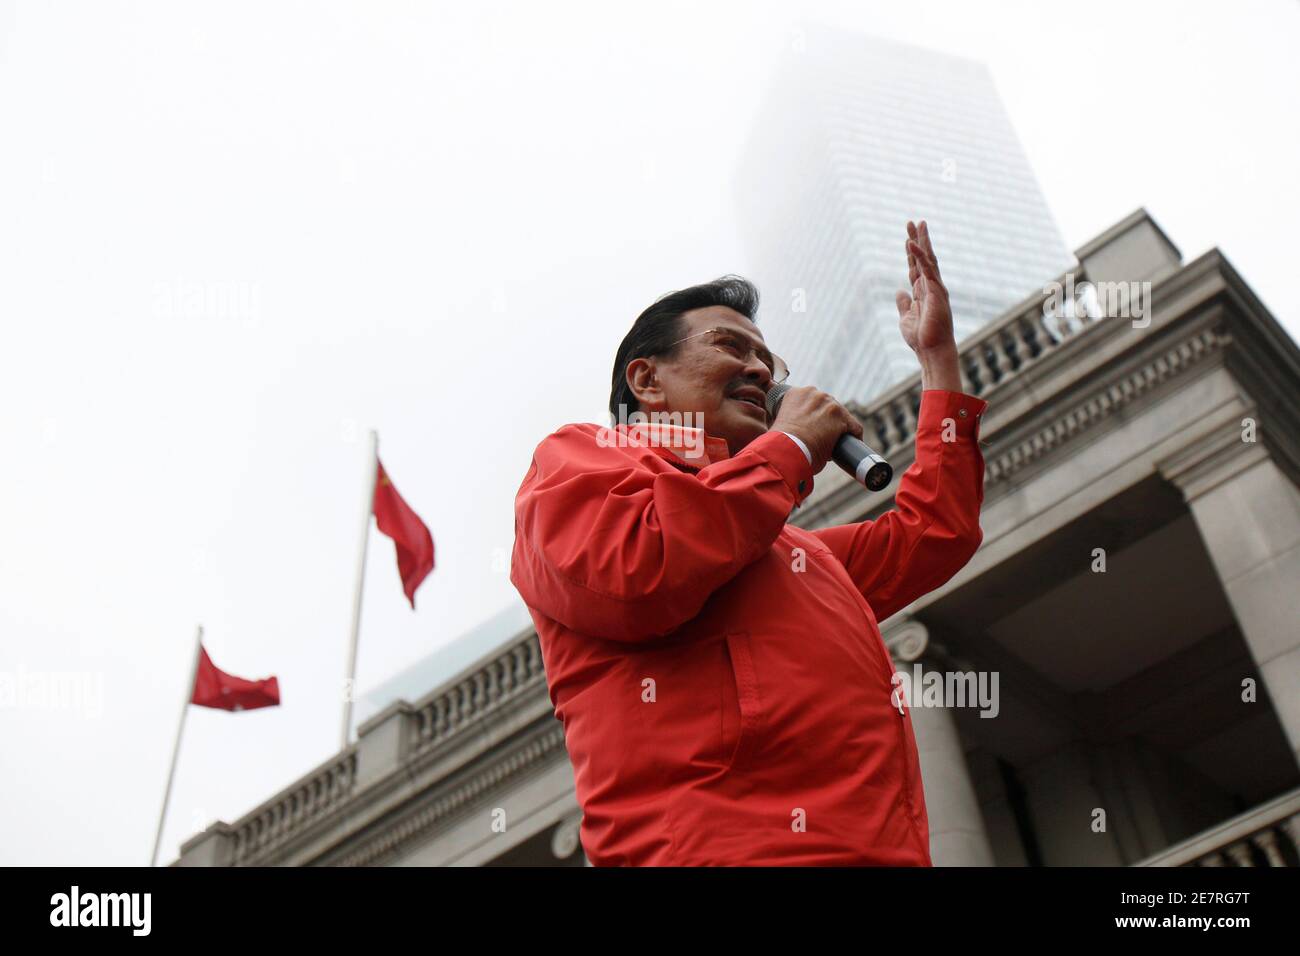 Philippine's presidential candidate and former president Joseph Estrada speaks to overseas Filipinos during an Easter event at Chater road in Hong Kong April 4, 2010. Estrada is on the campaign trail in the territory to meet overseas Filipinos for the upcoming May 10 national election.     REUTERS/Tyrone Siu  (CHINA - Tags: POLITICS ELECTIONS IMAGES OF THE DAY) Stock Photo